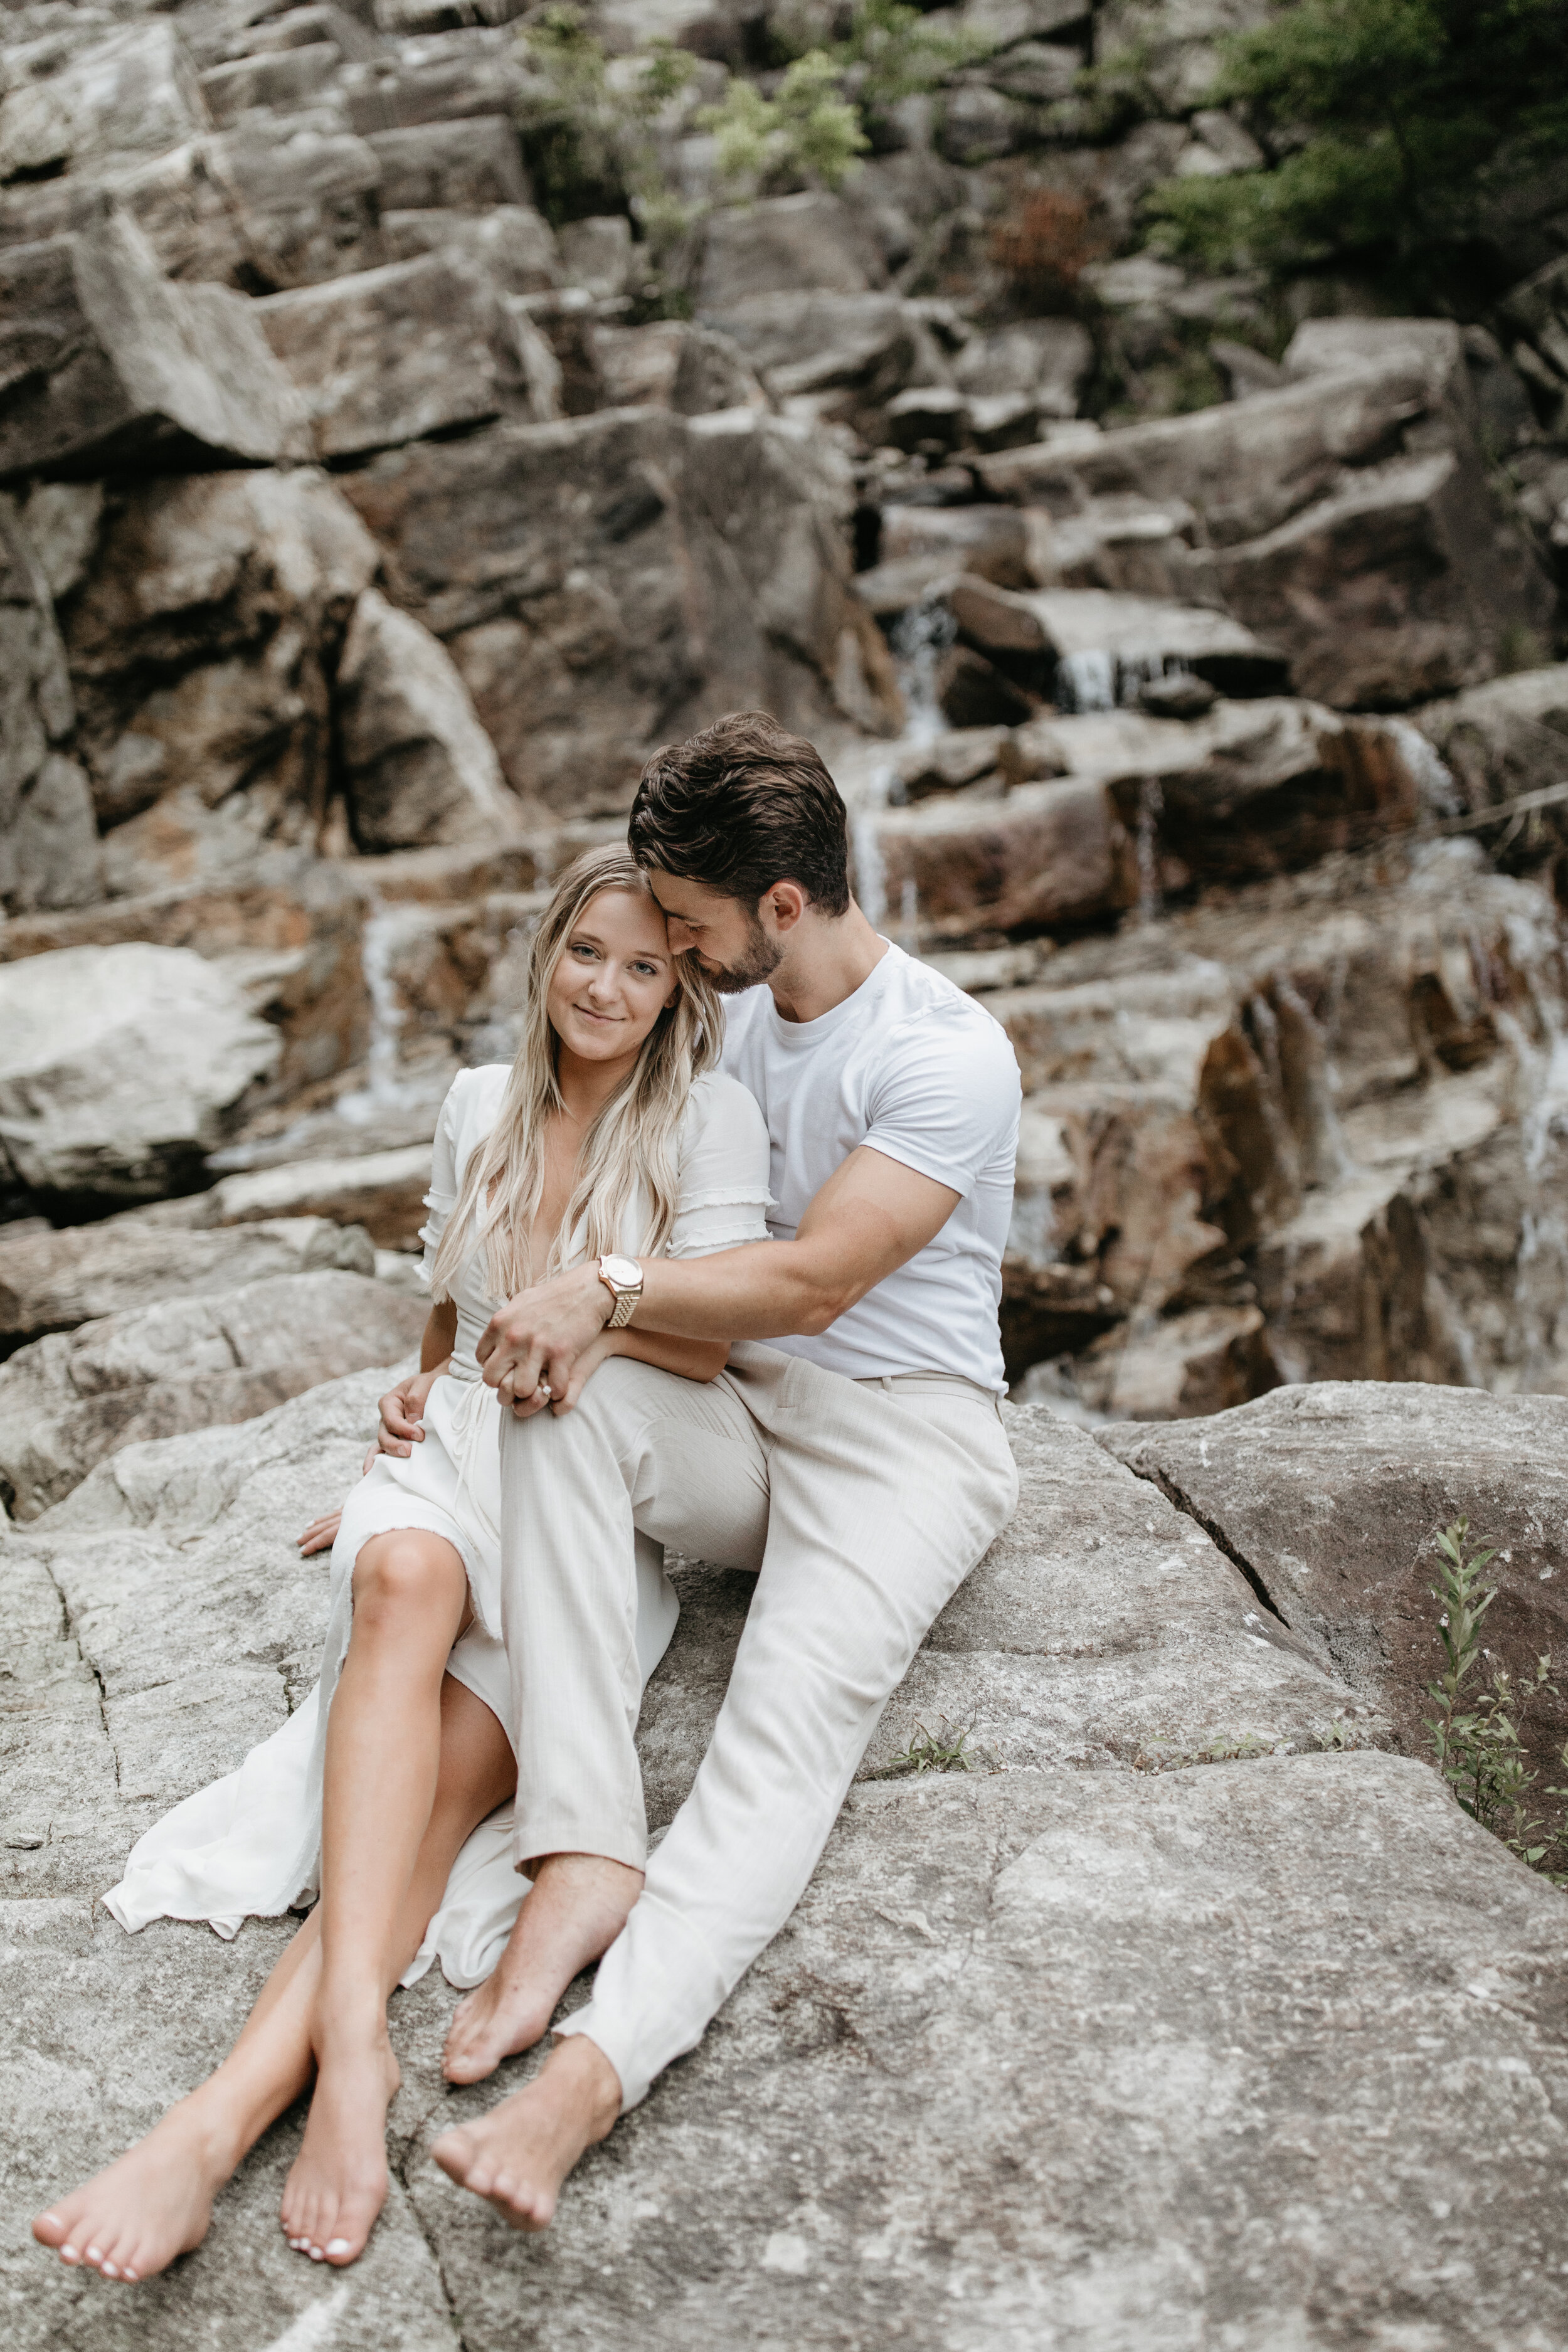 Nicole-Daacke-Photography-michaux-state-forest-elopement-adventure-engagement-session-pennsylvania-elopement-pa-elopement-photographer-gettysburg-photographer-state-park-elopement-engagement-session-pennsylvania-waterfall-170.jpg